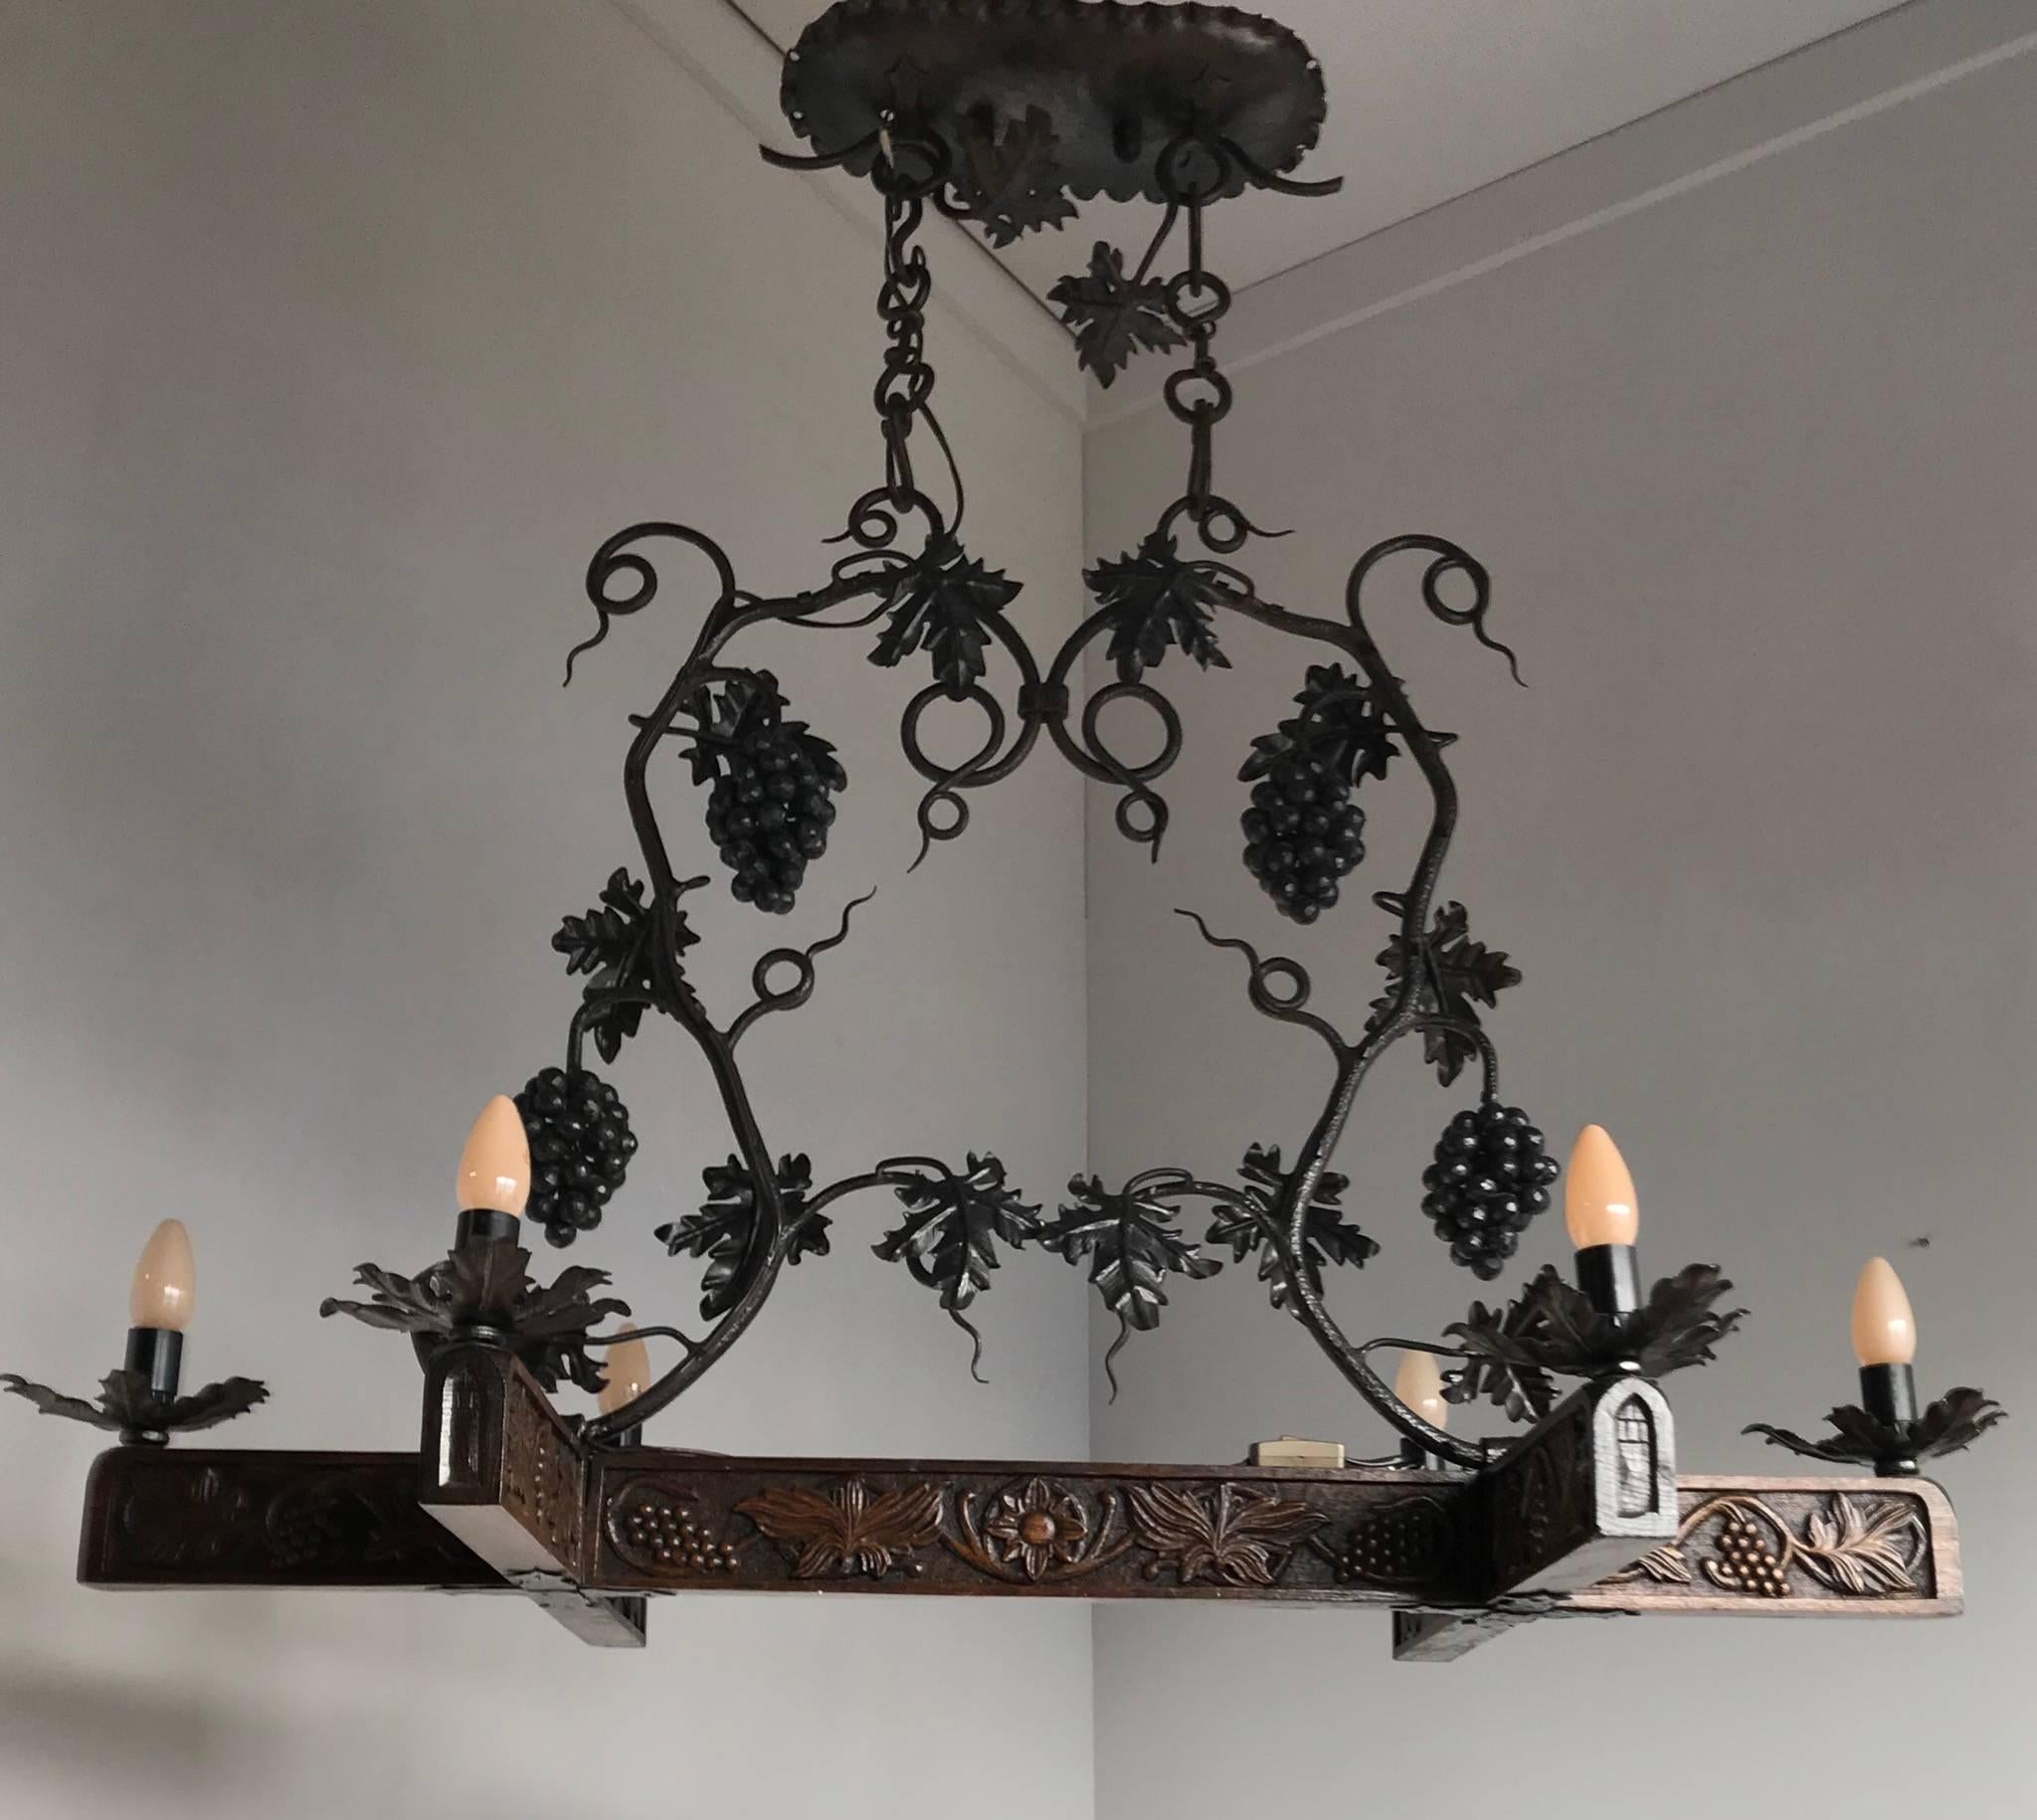 Stunning & Horizontal Wrought Iron Chandelier with Grapes & Hand-Carved Branches 2